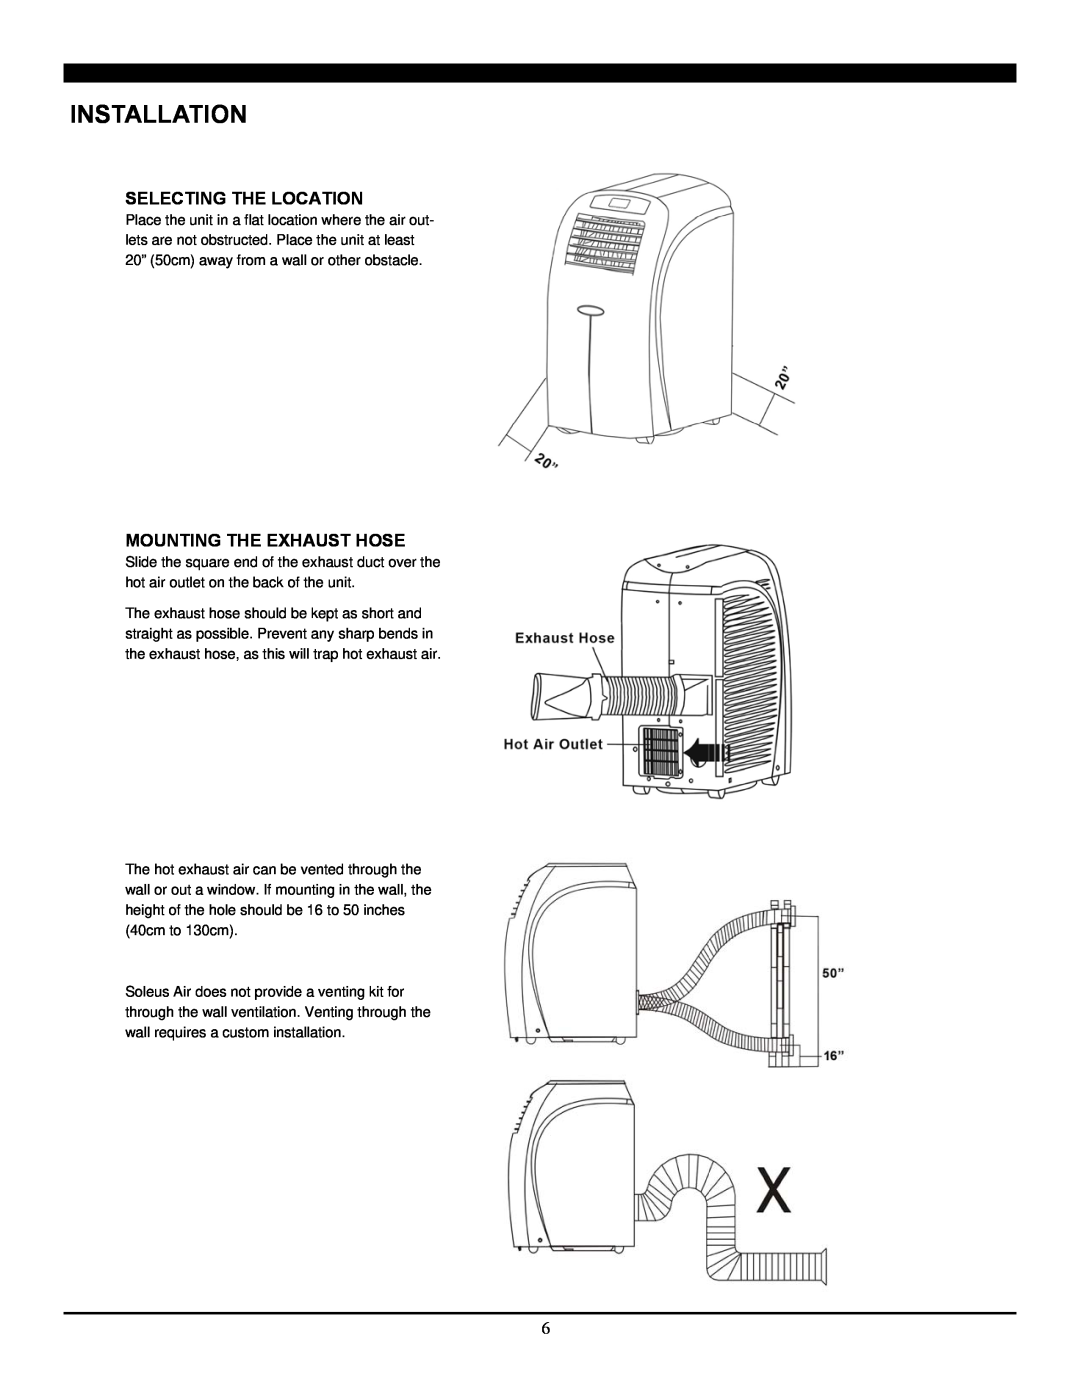 Soleus Air PH3-12R-03 operating instructions Installation, Selecting The Location, Mounting The Exhaust Hose 